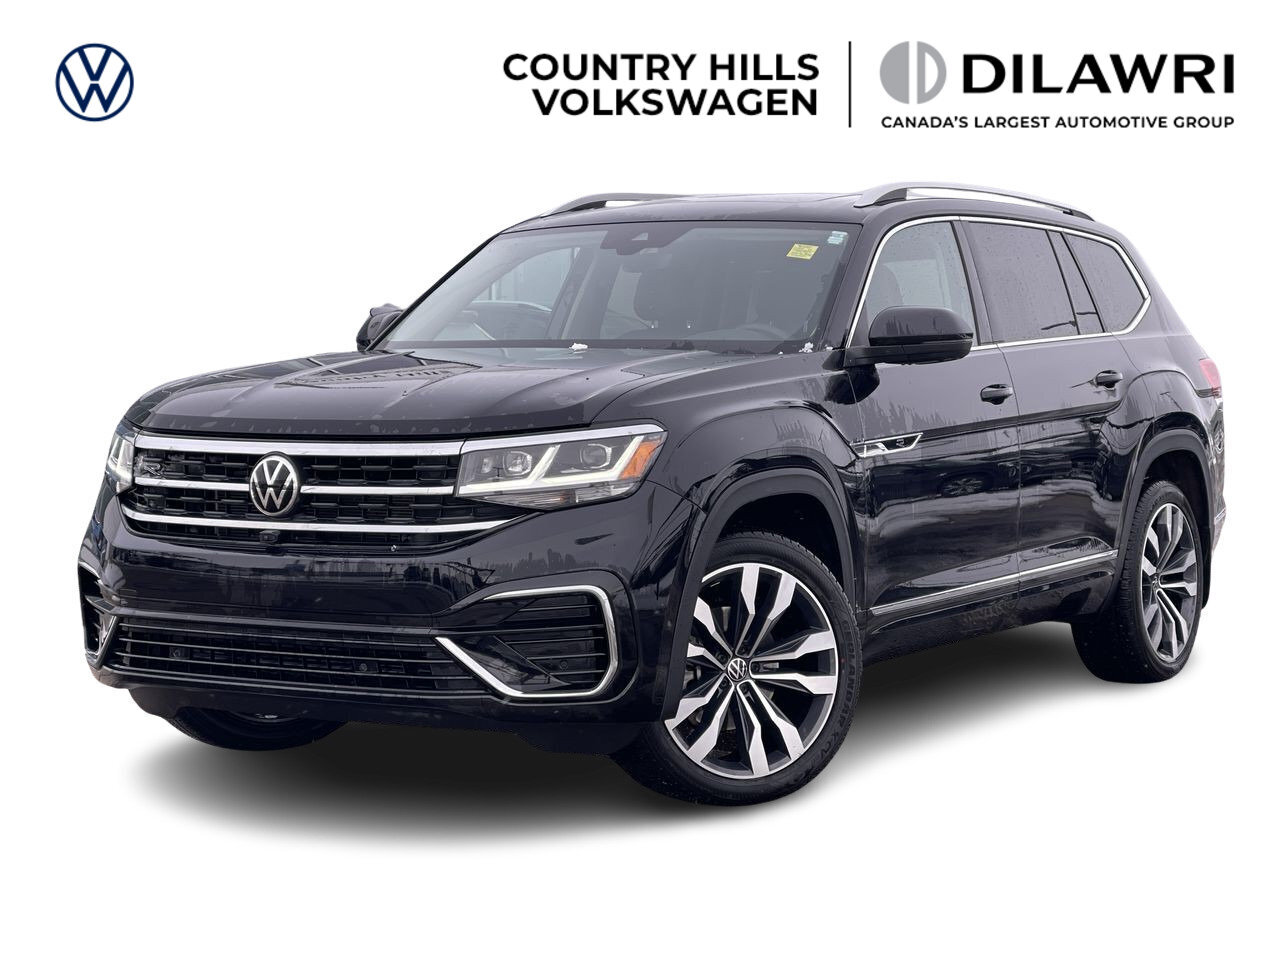 2021 Volkswagen Atlas Execline Sunroof, Heated Ventilated Seats, Leather